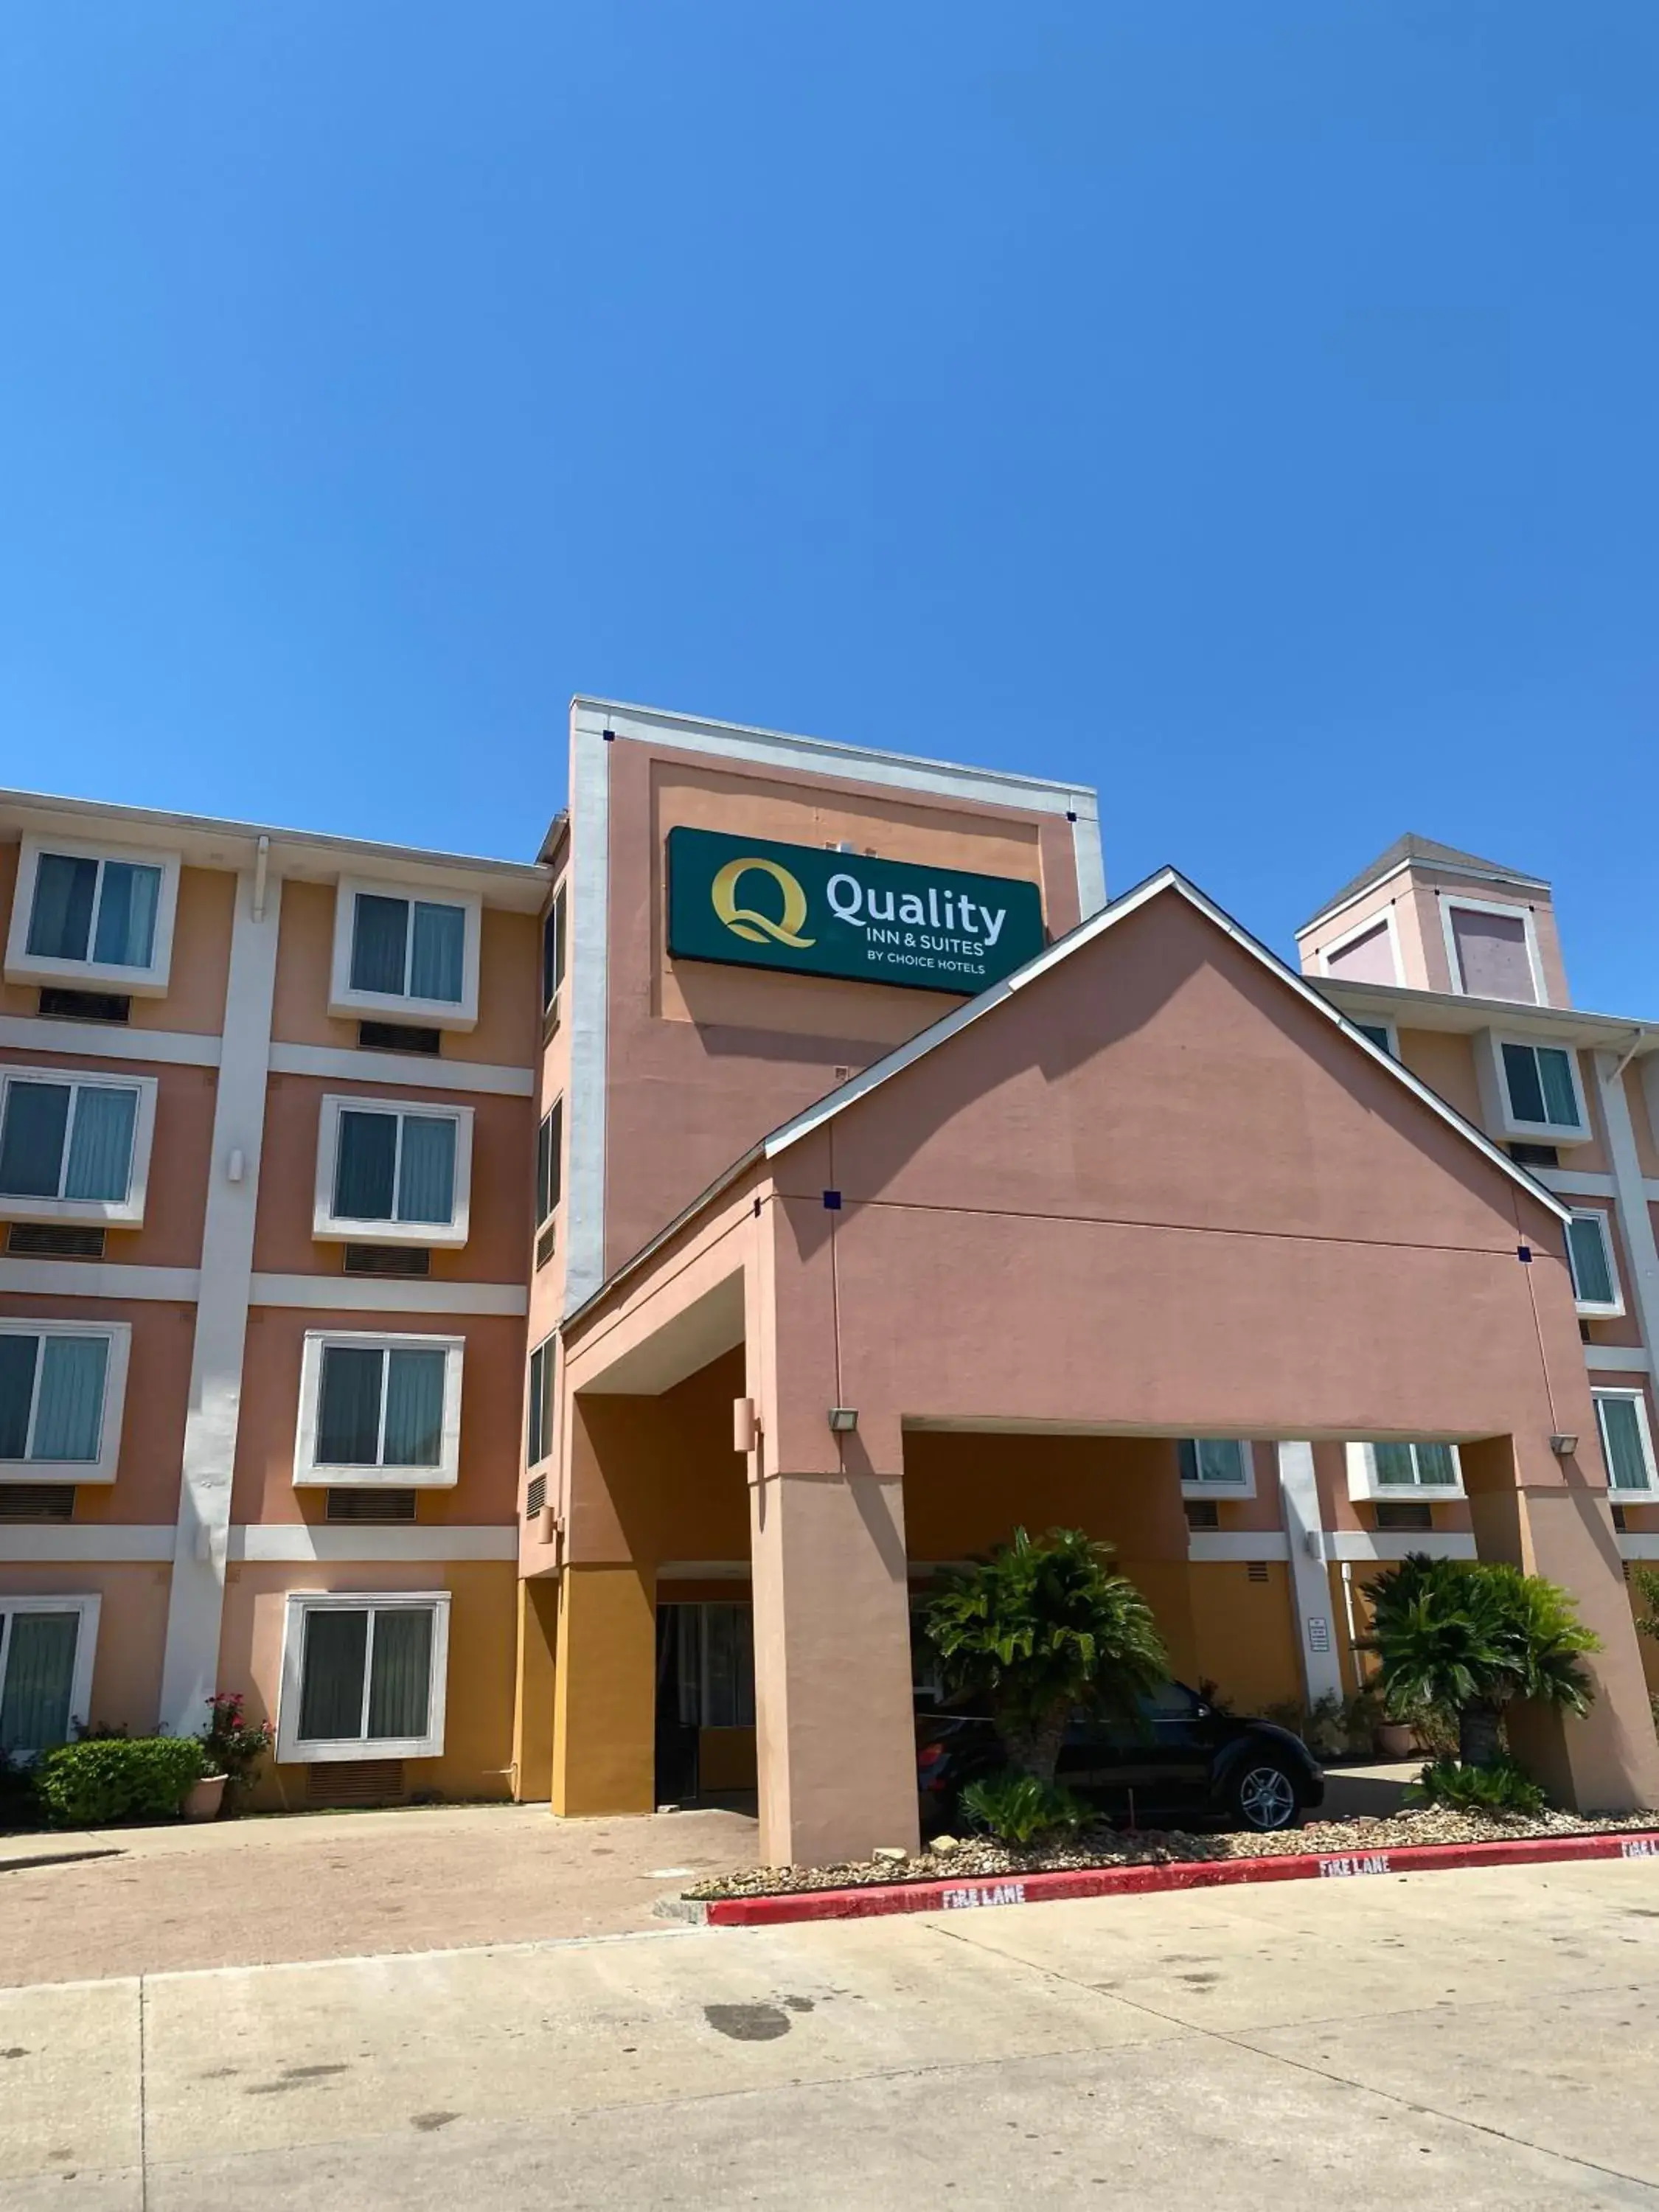 Property Building in Quality Inn and Suites Westchase